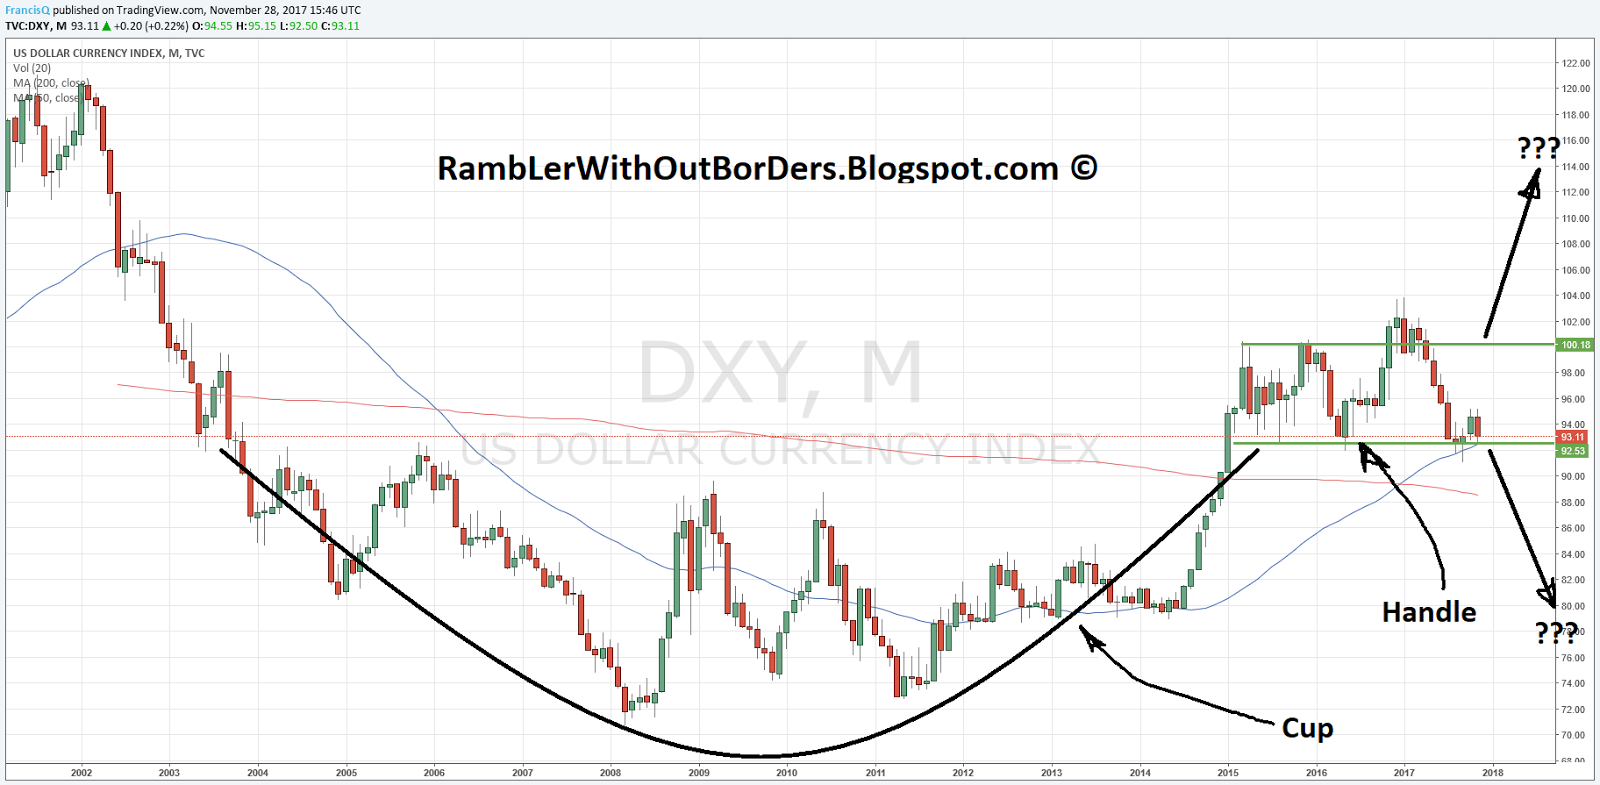 Us Dollar Index Dxy Chart